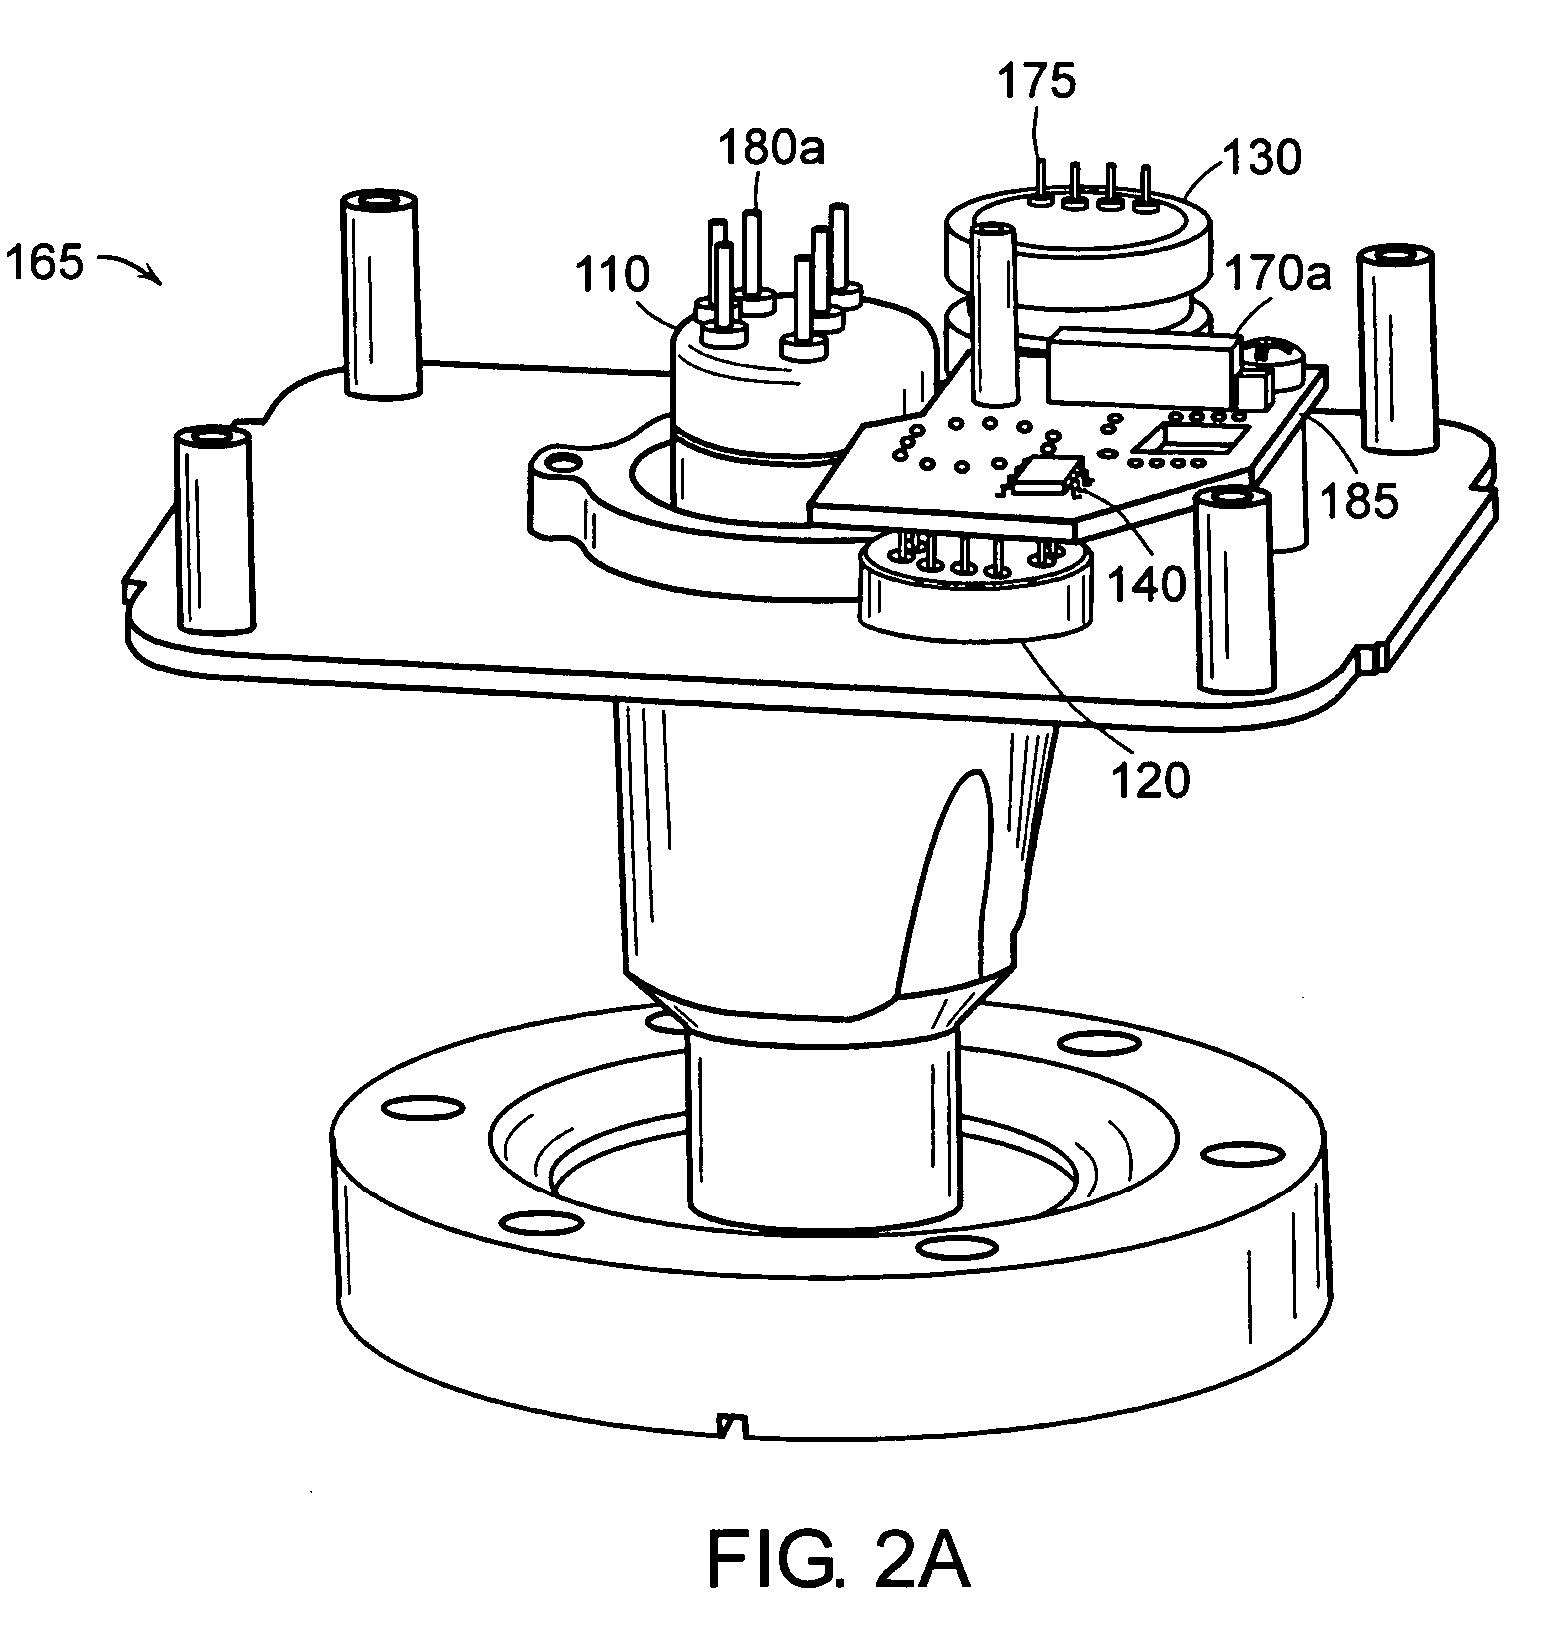 Method and apparatus for storing vacuum gauge calibration parameters and measurement data on a vacuum gauge structure